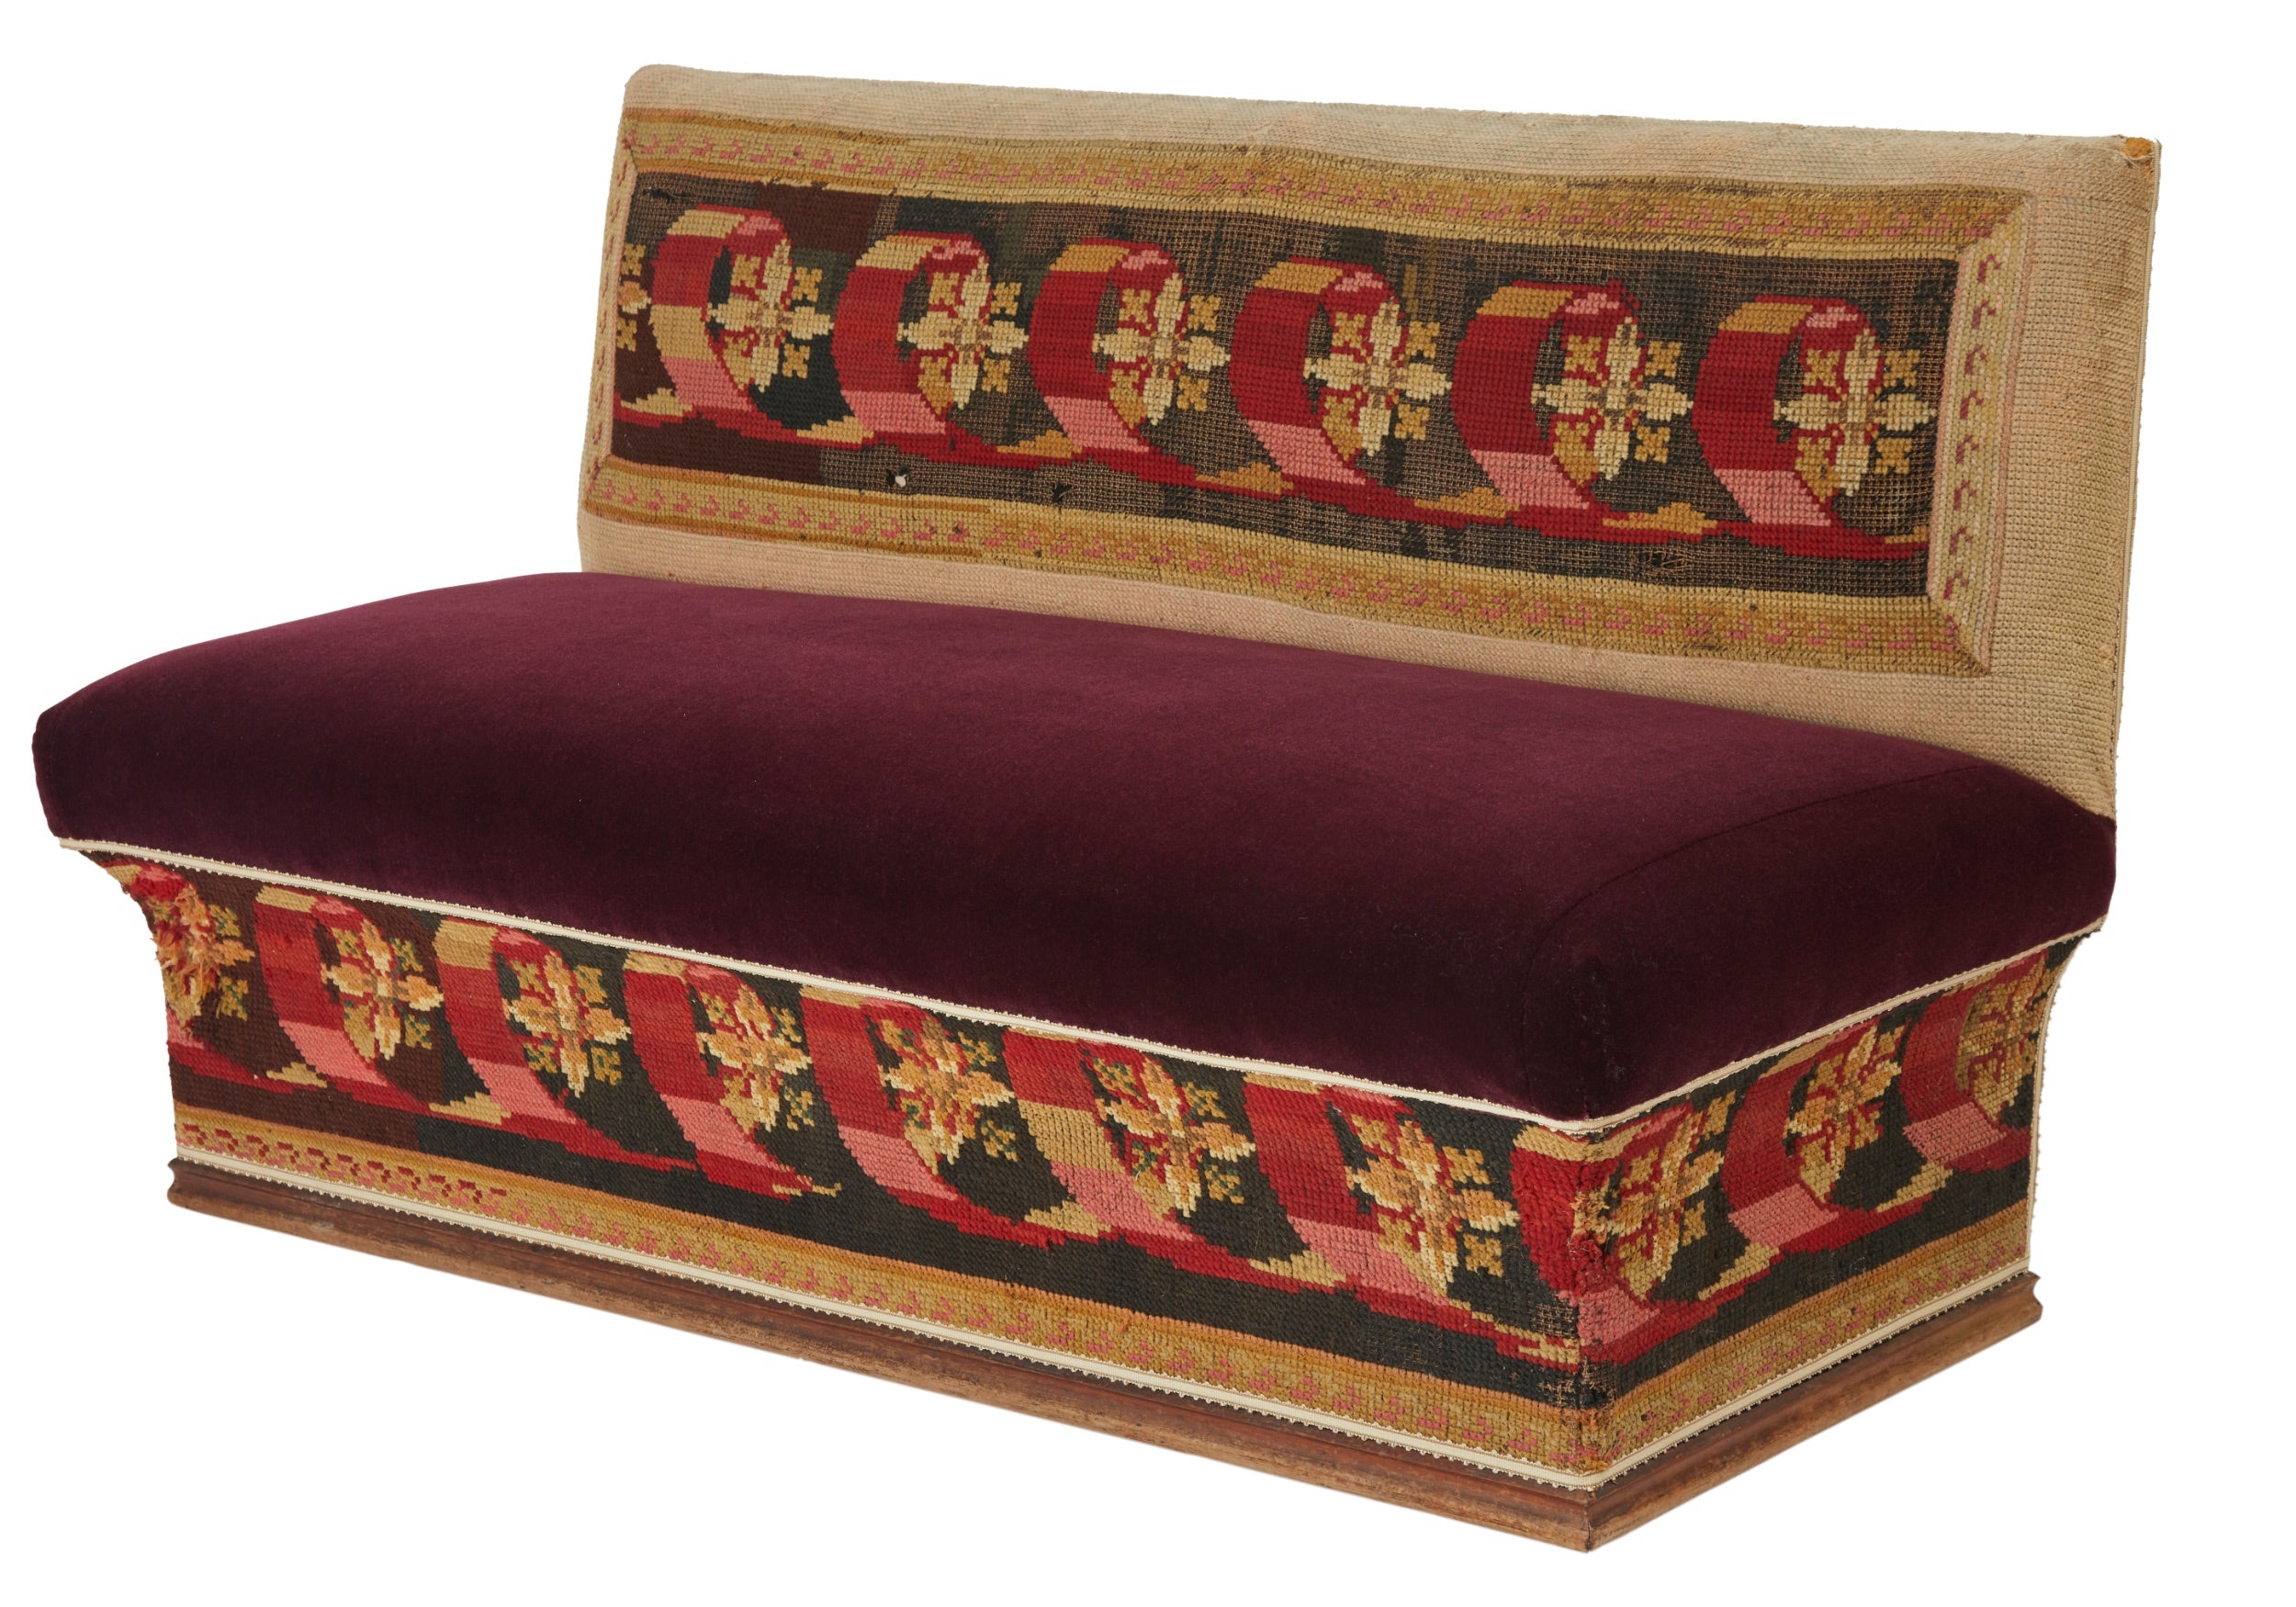 An Early 19th Century Ottoman Sofa with a Needlework and Mohair Velvet Upholstery